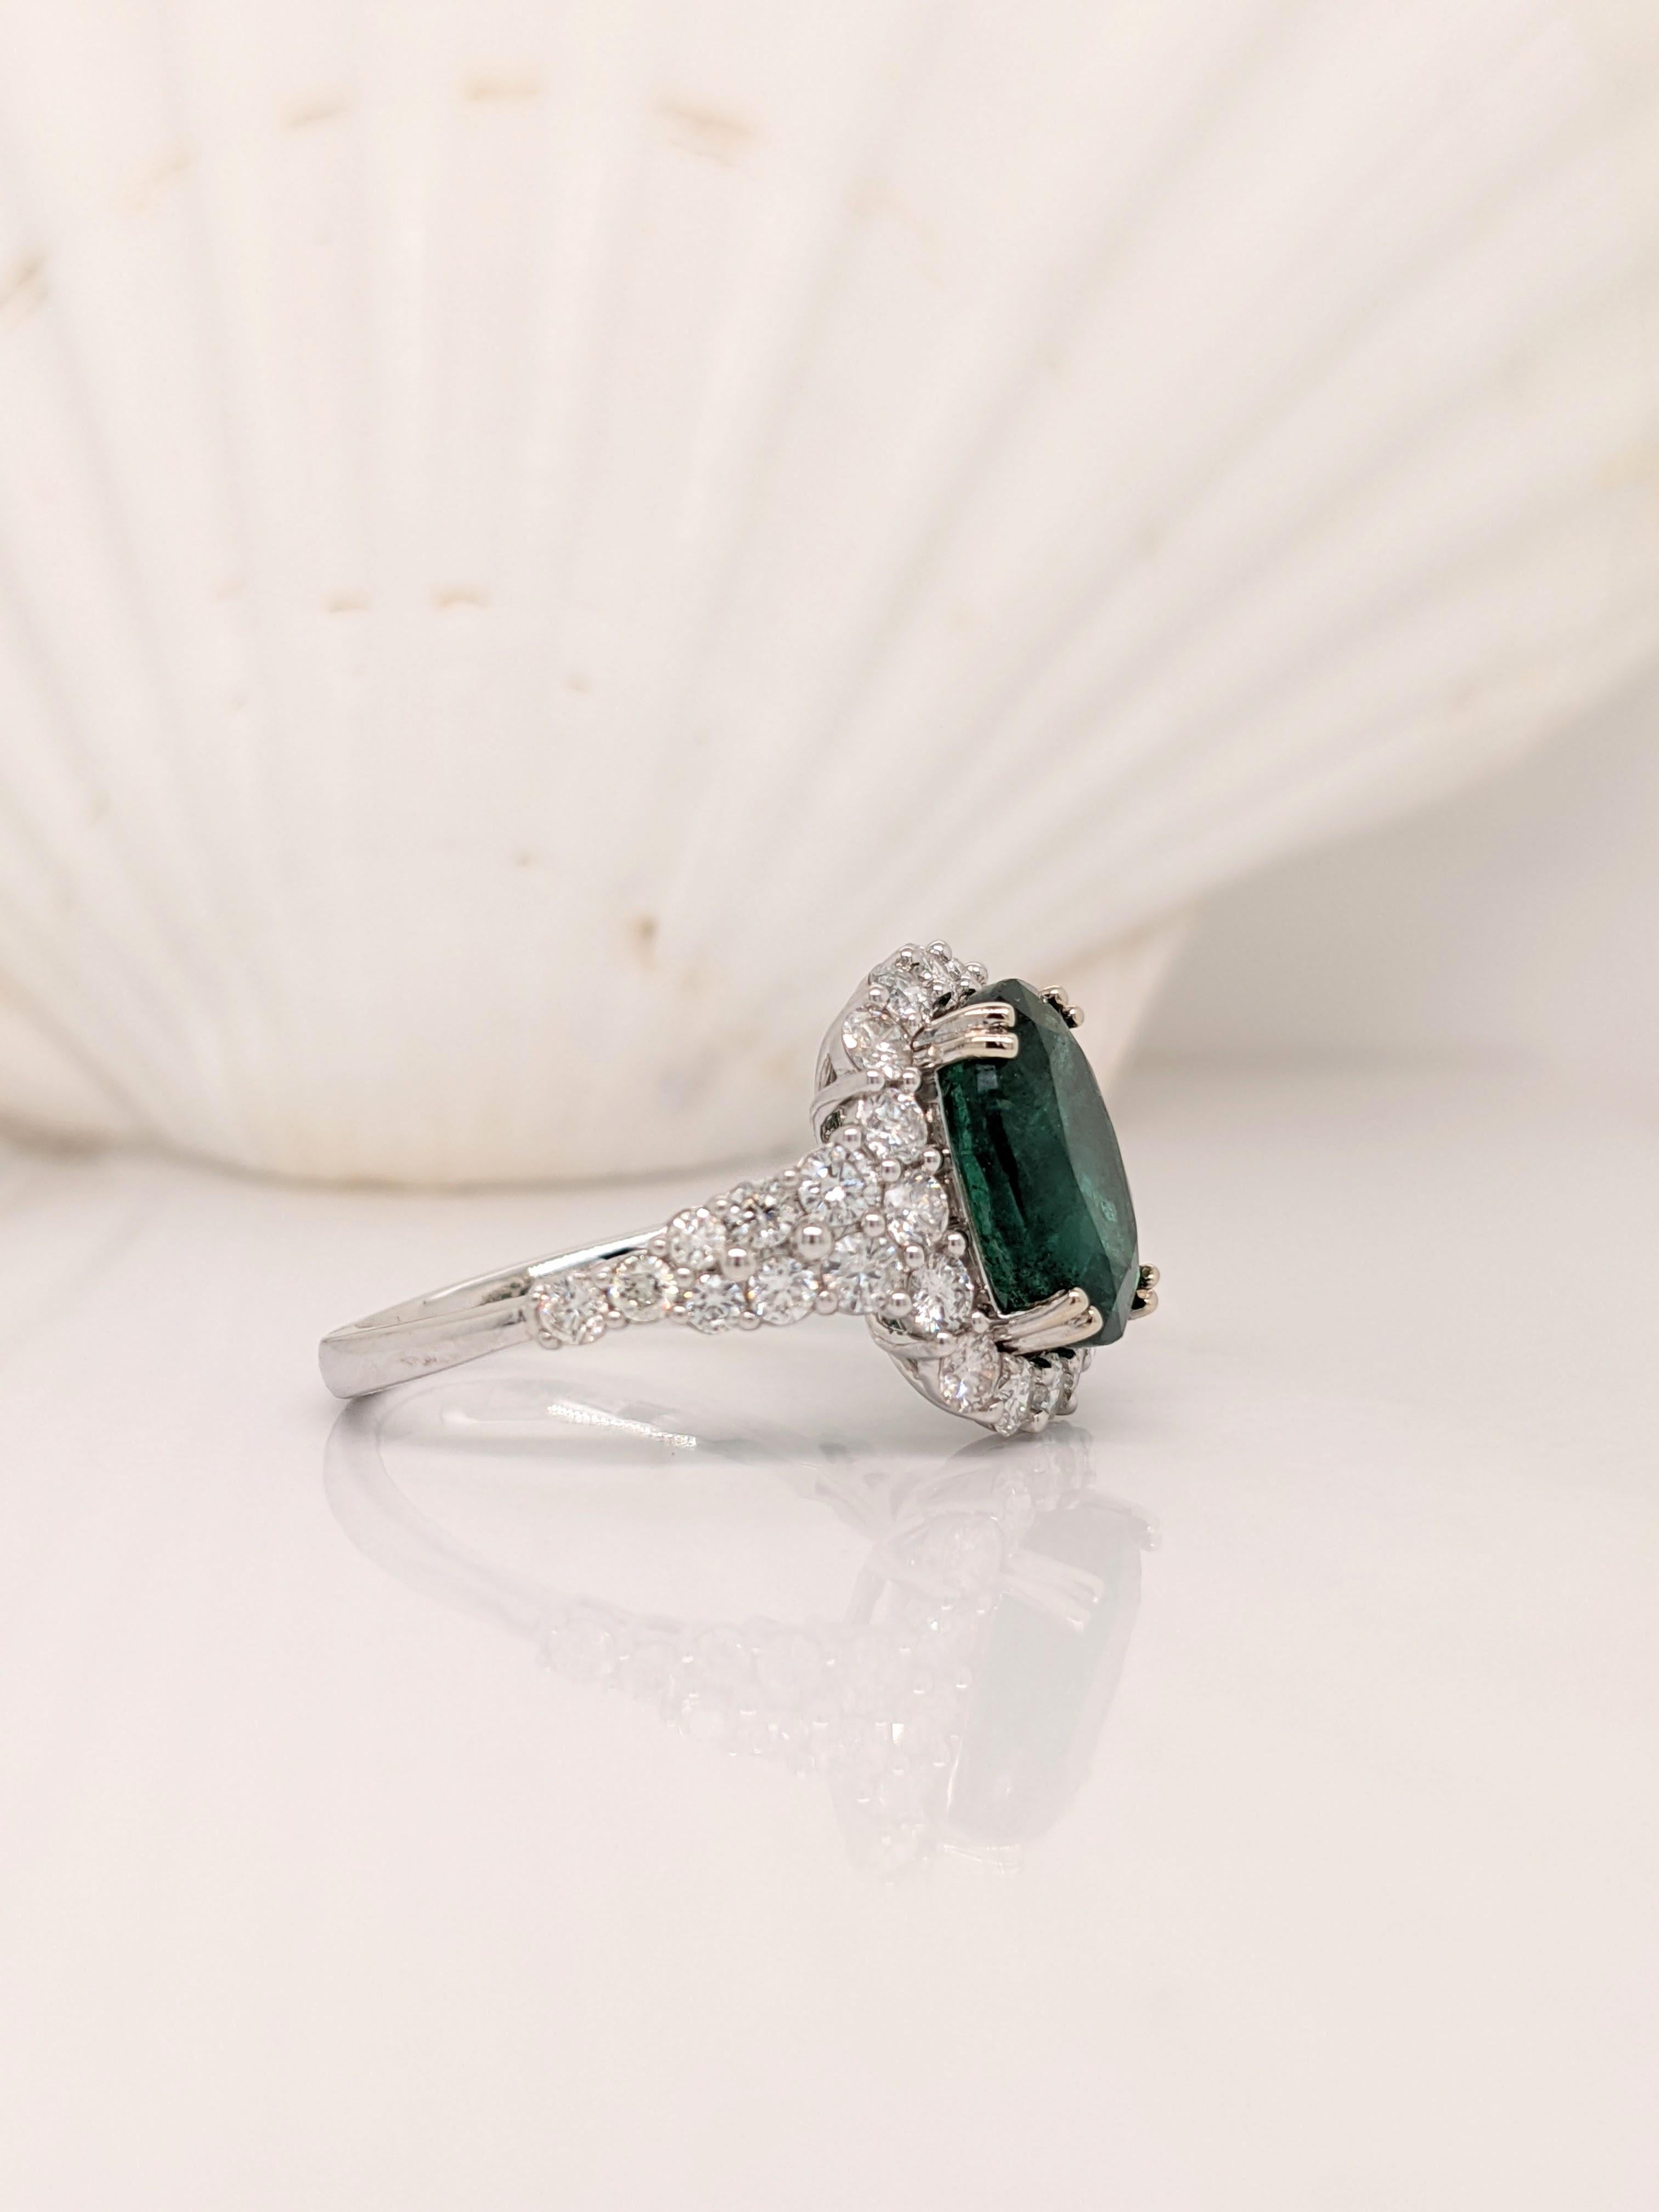 Renaissance 3 Carat Emerald Ring in 14k Solid White Gold with a Halo of Natural Diamonds For Sale